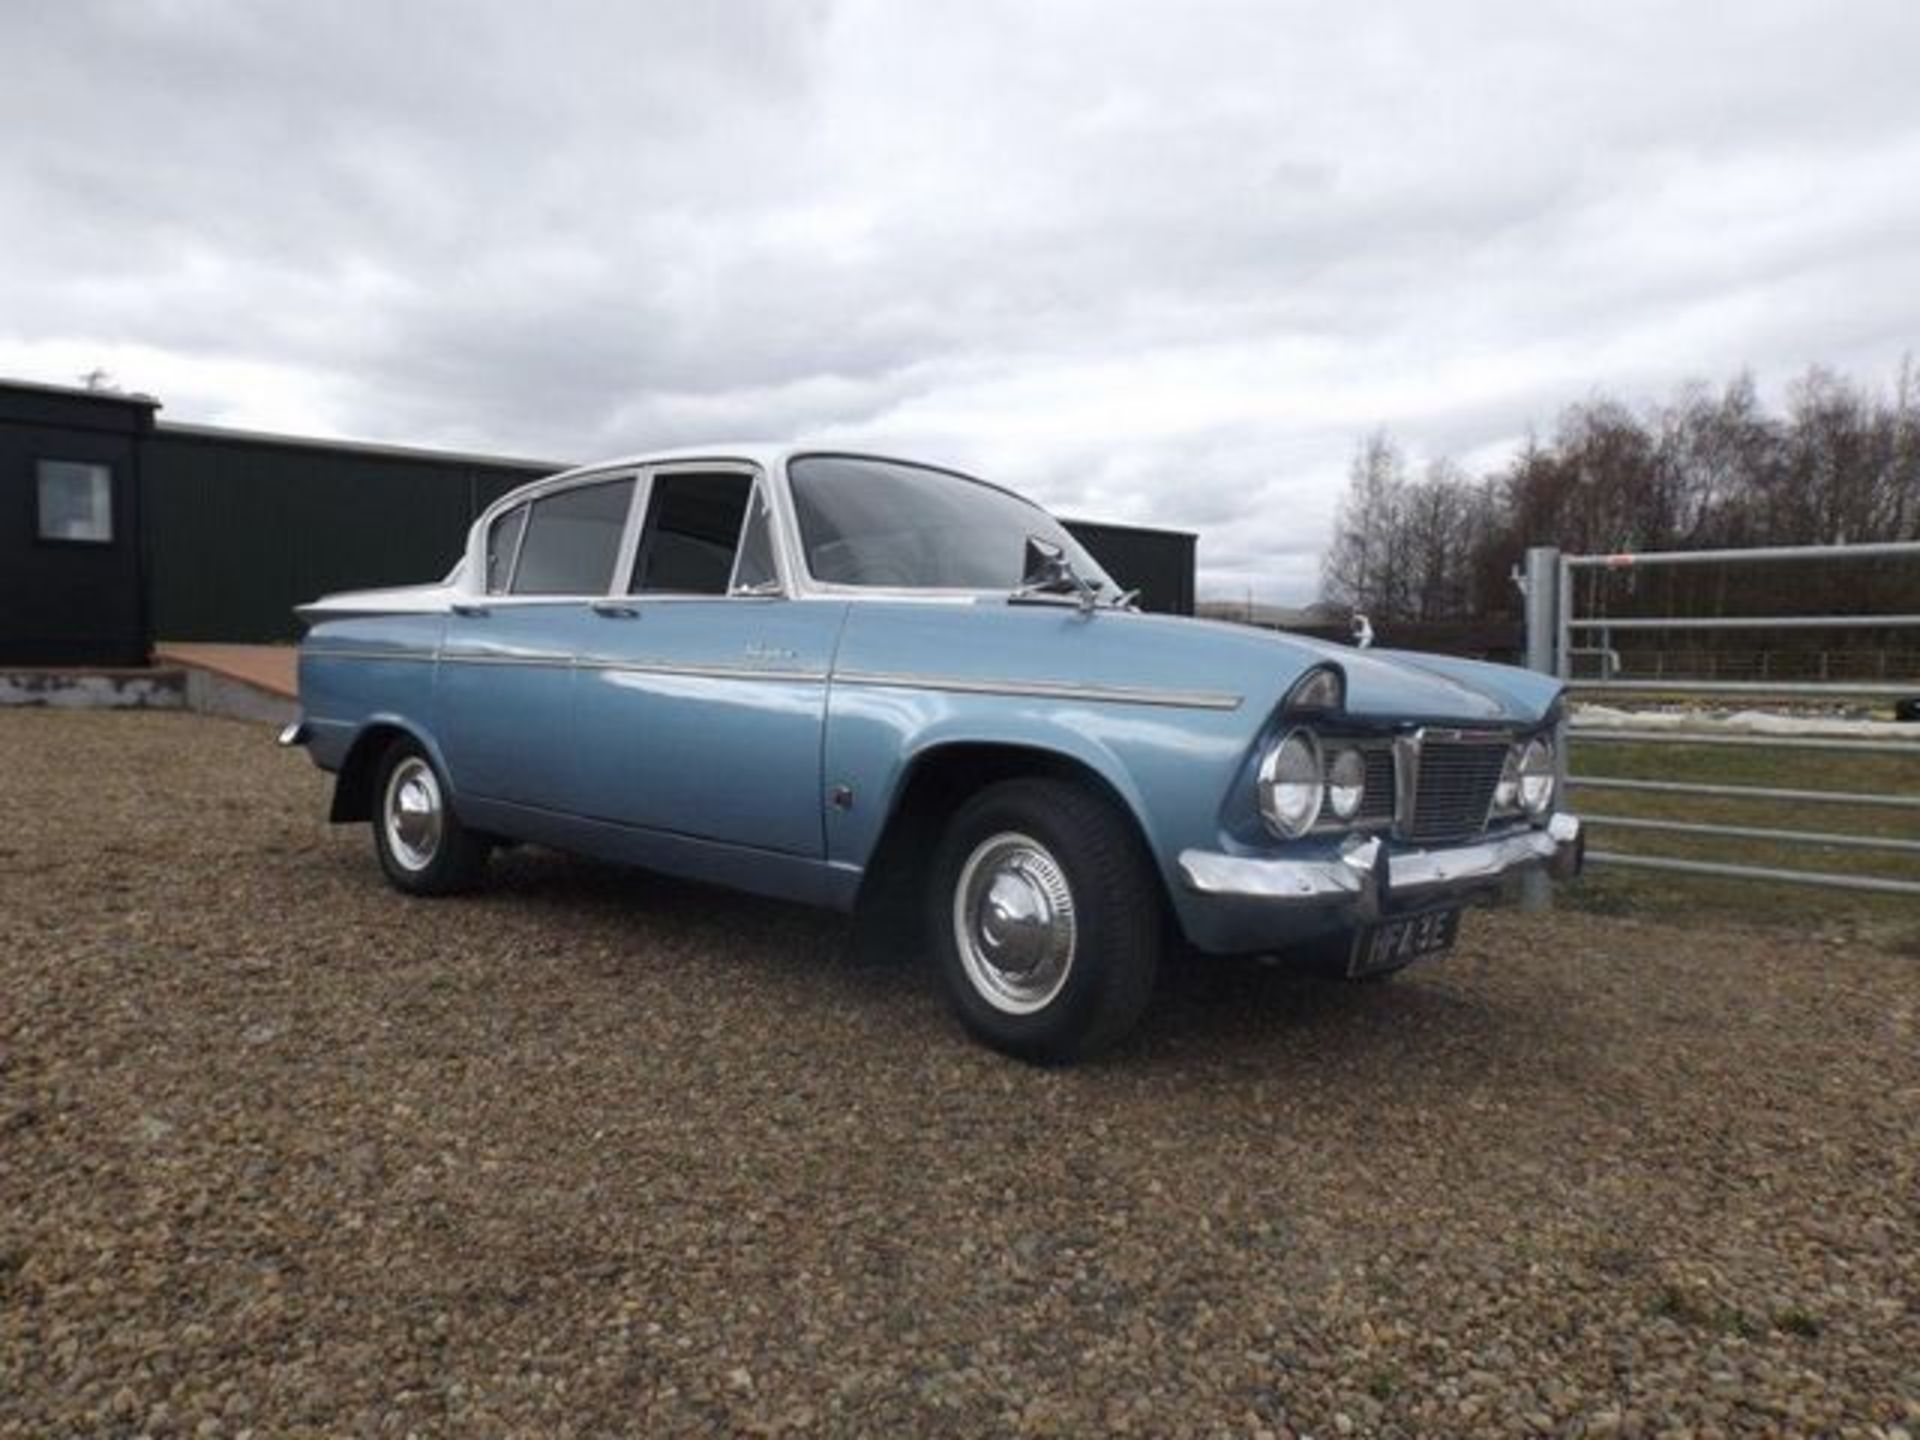 HUMBER, SCEPTRE MKII - 1725cc, Chassis number B1320056320DHS0 - this is a Mark II example which - Image 7 of 18